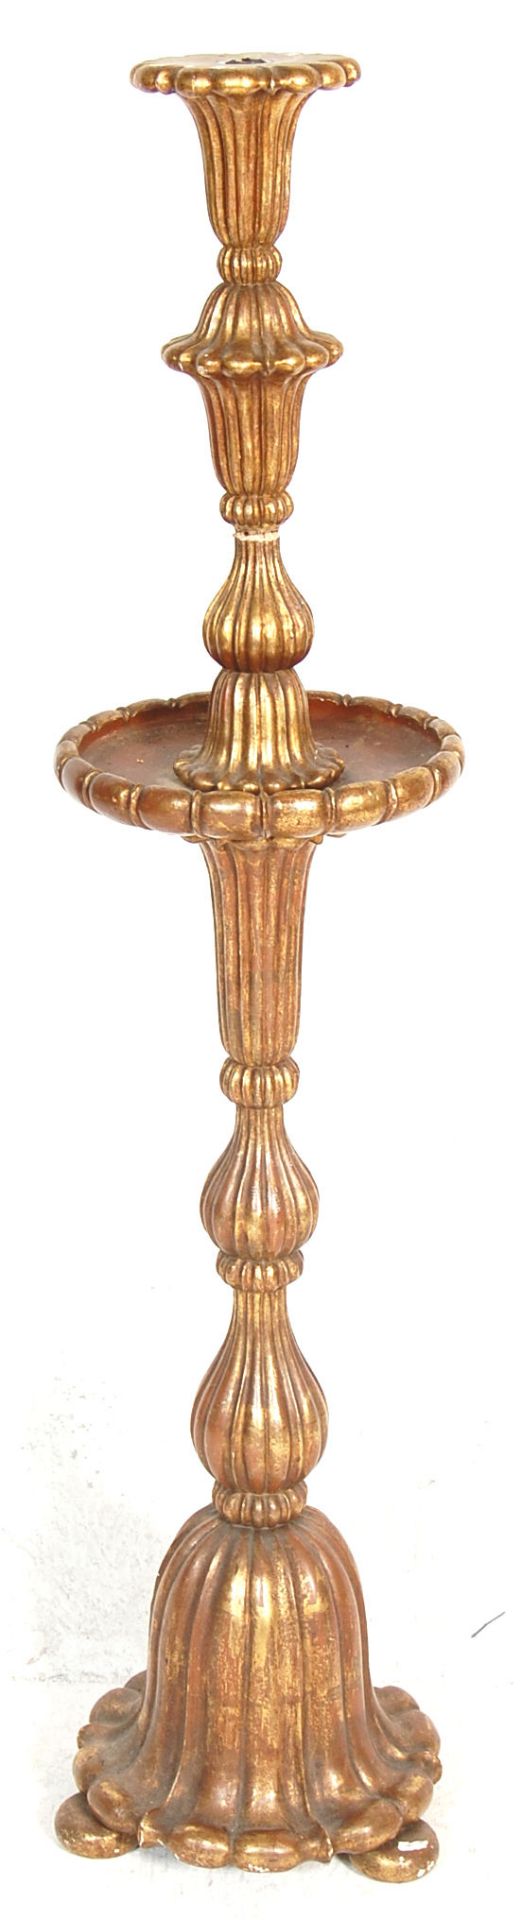 A 20th Century antique rococo ecclesiastical floor standing large candlestick stand. The upright